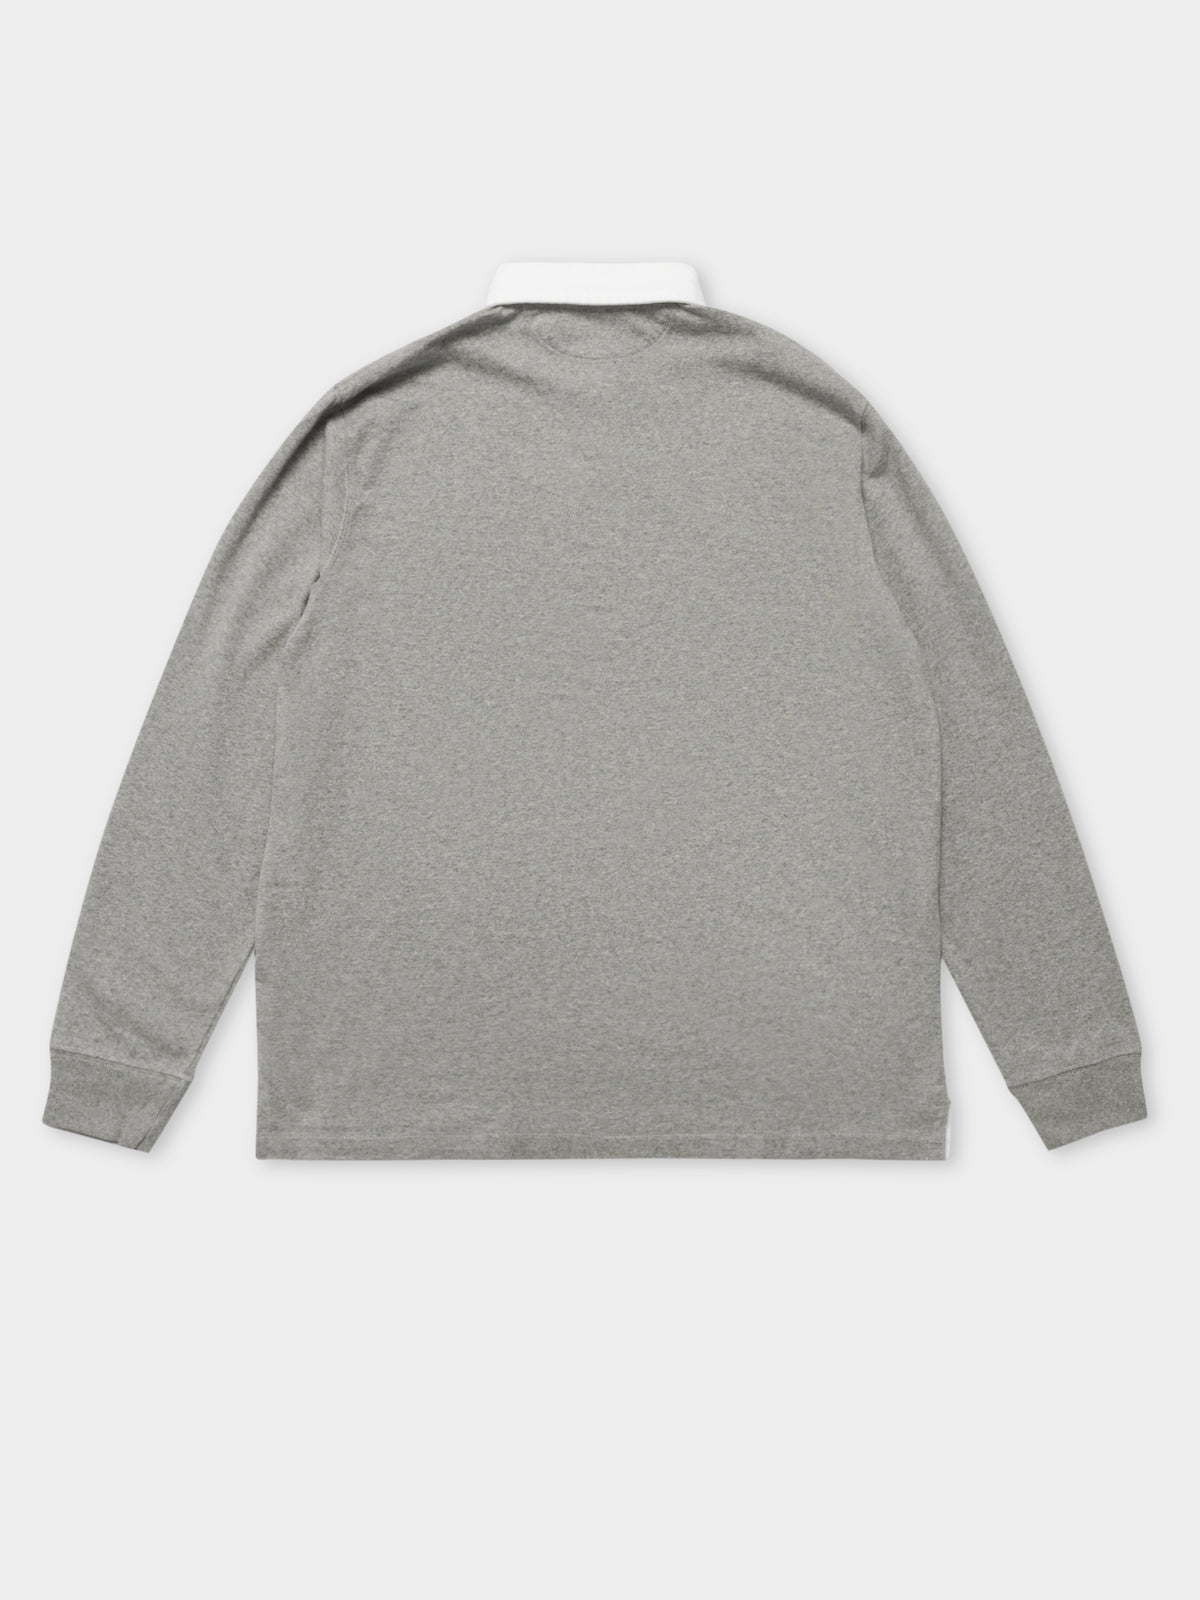 Long Sleeve Rugby Shirt in Grey